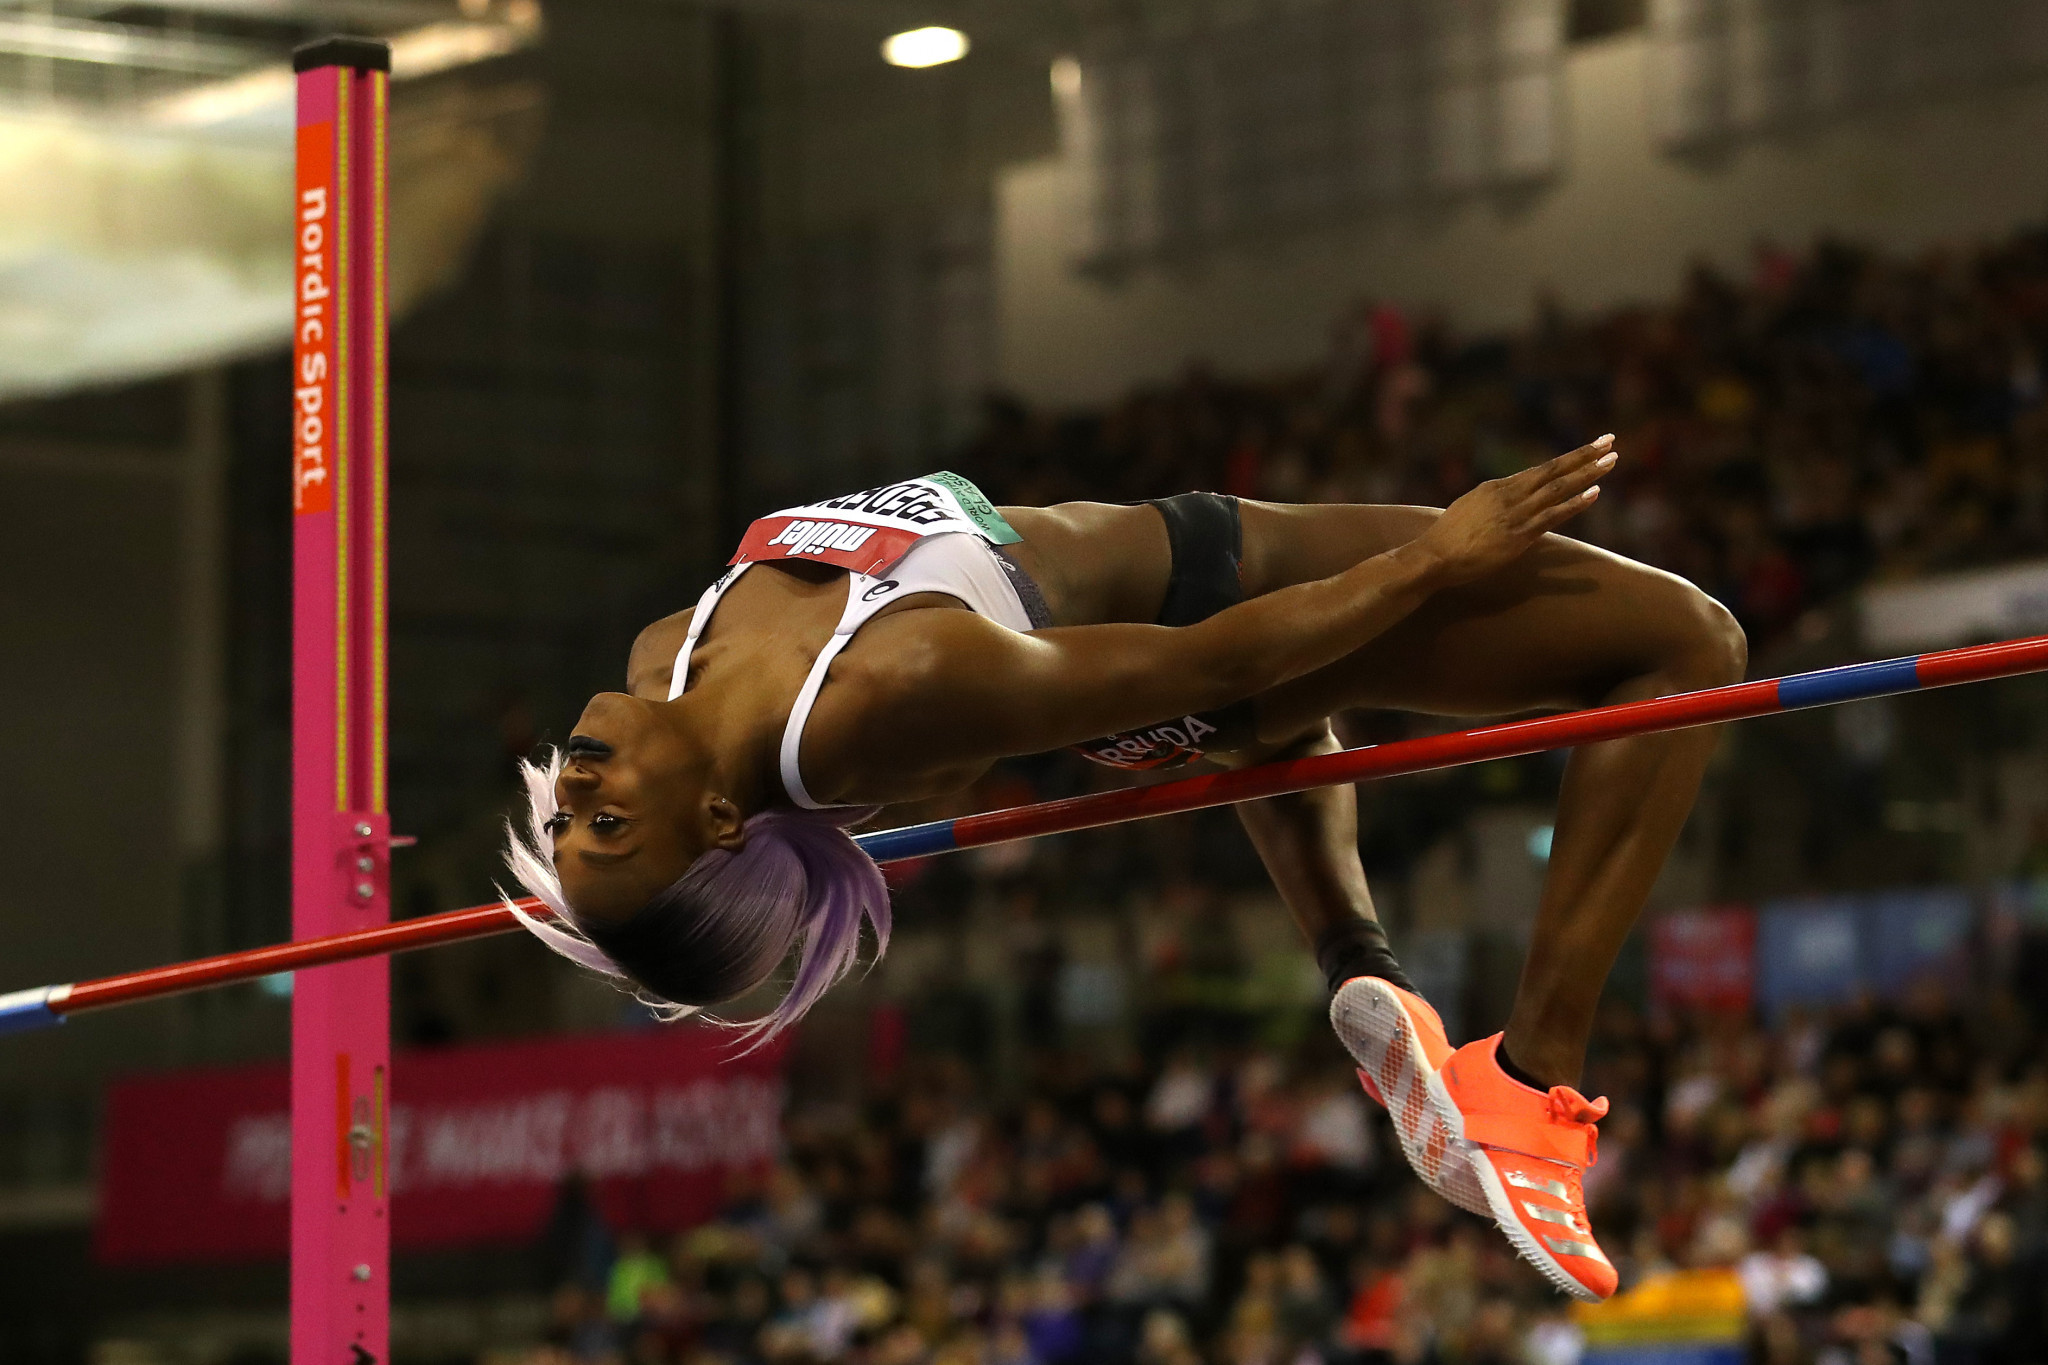 Priscilla Frederick-Loomis in high jump action earlier this year ©Getty Images